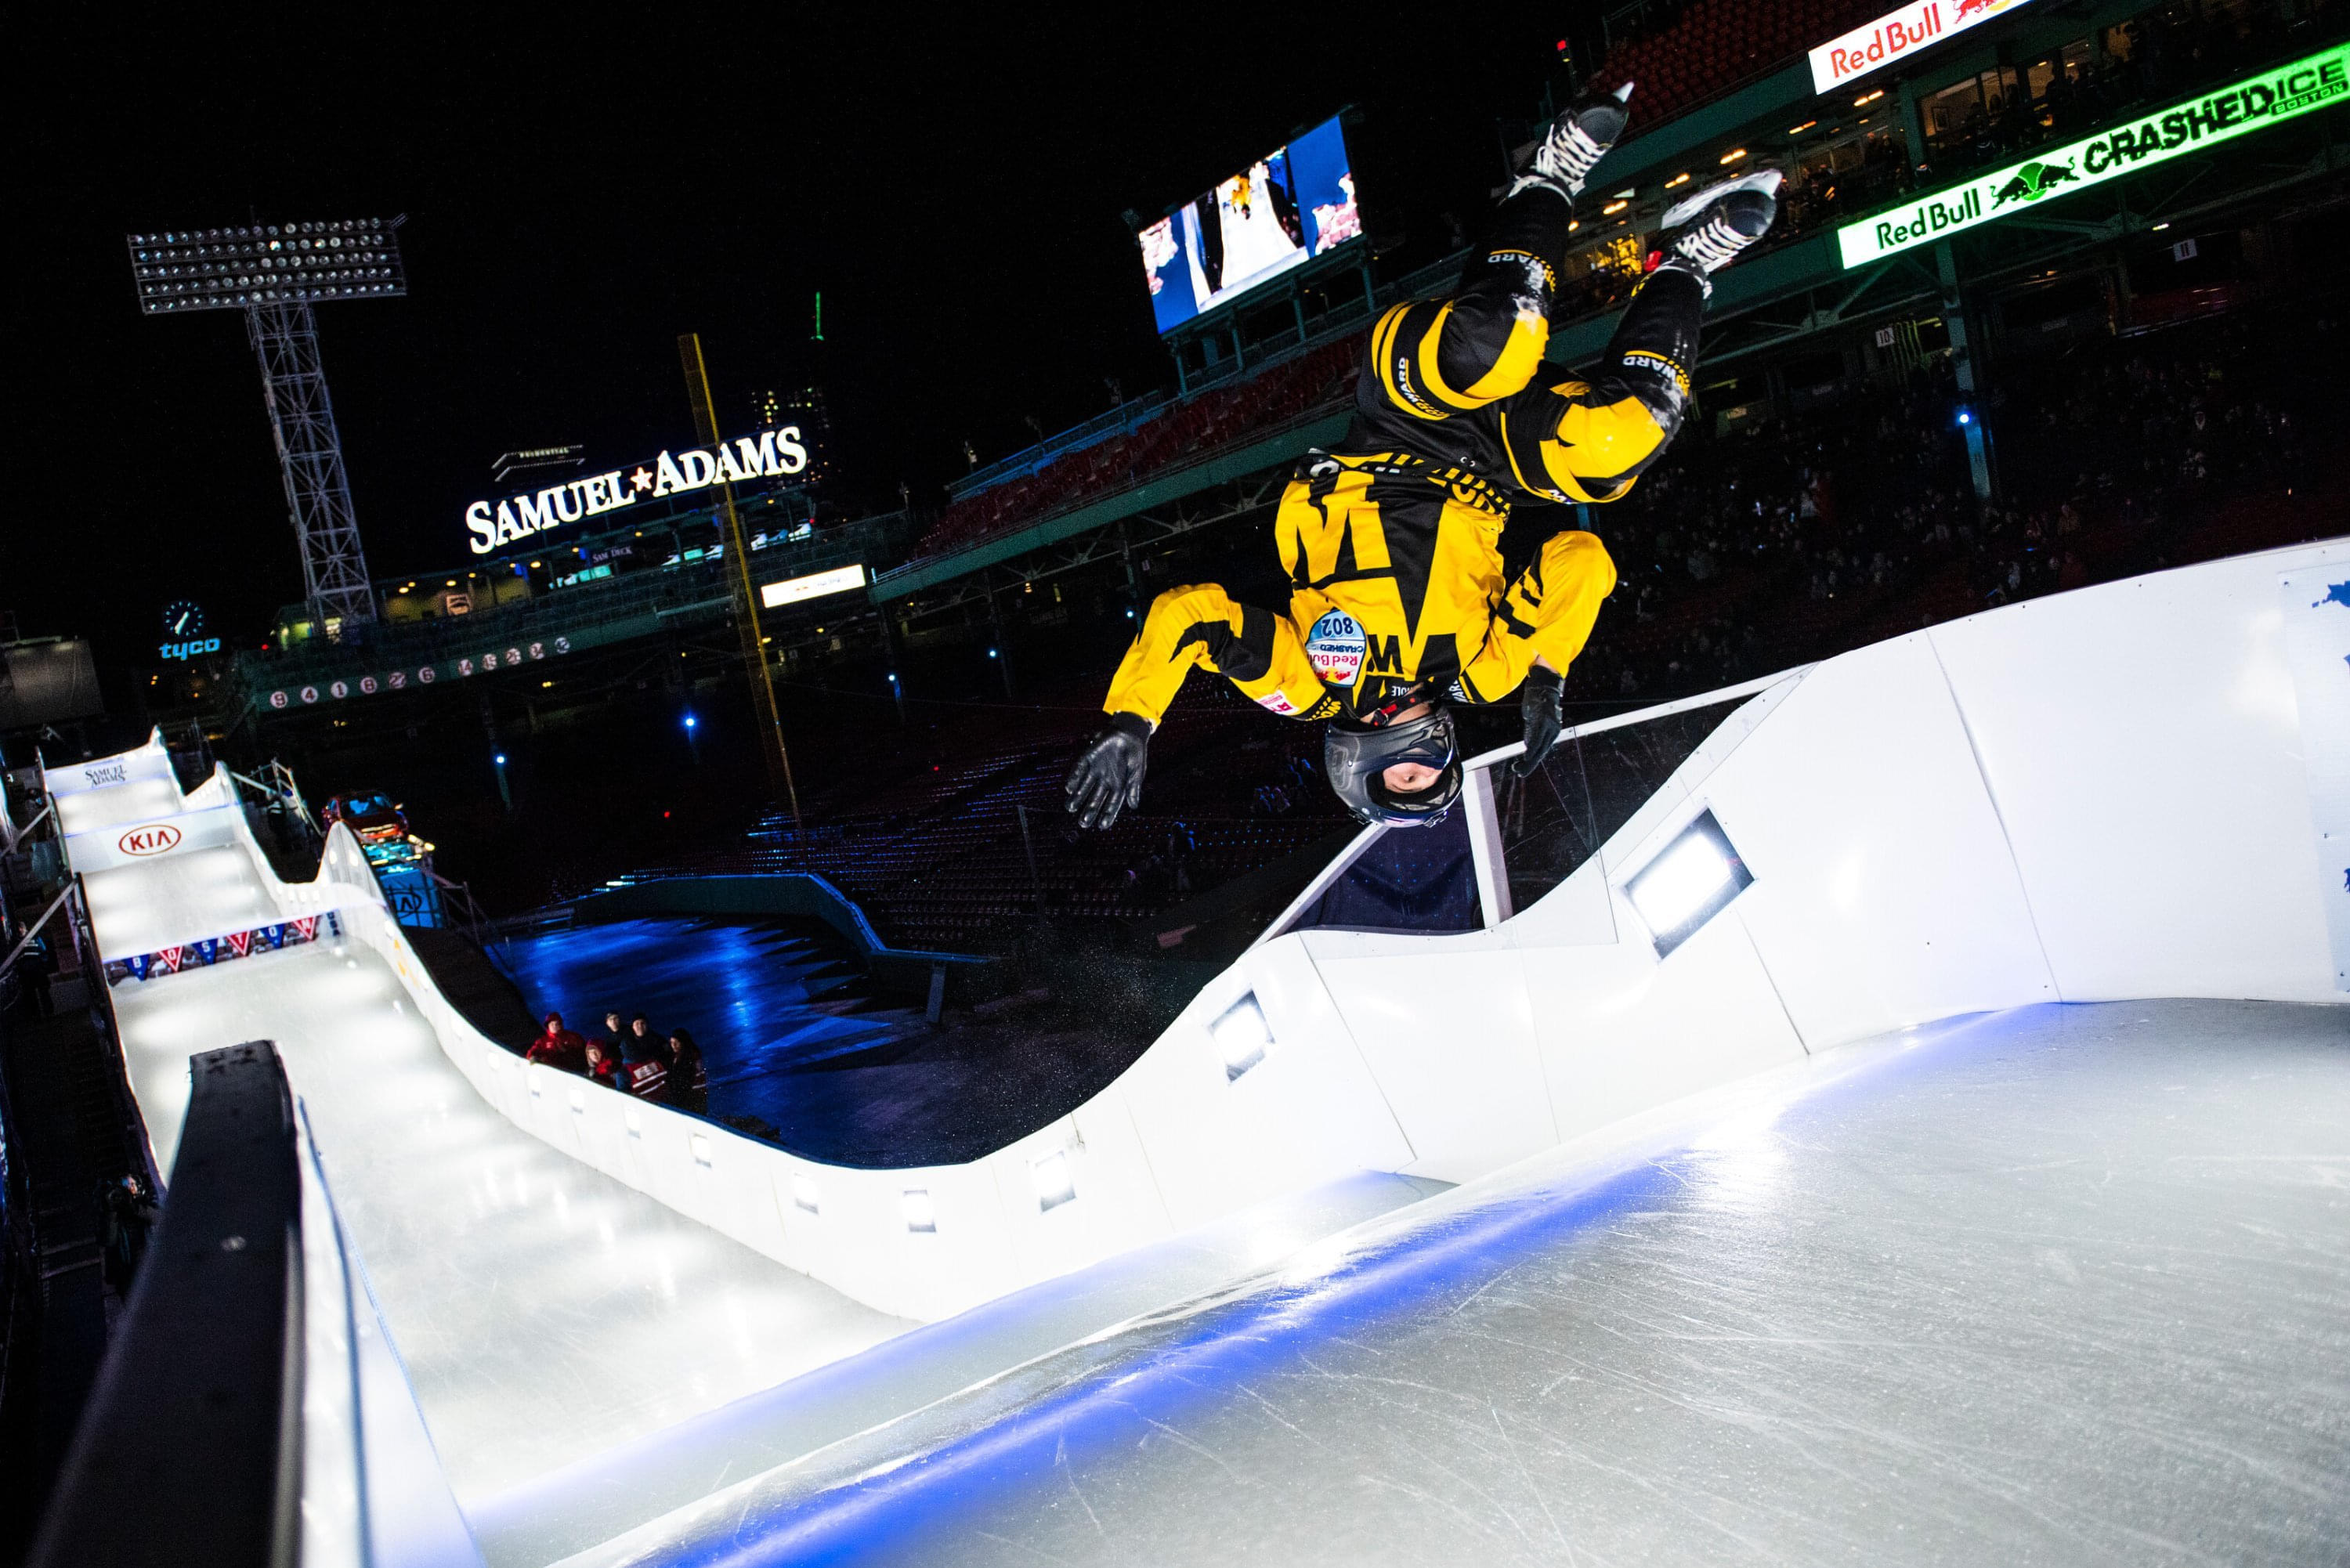 Backflips on ice? No problem Image: Ryan Taylor / Red Bull Content Pool